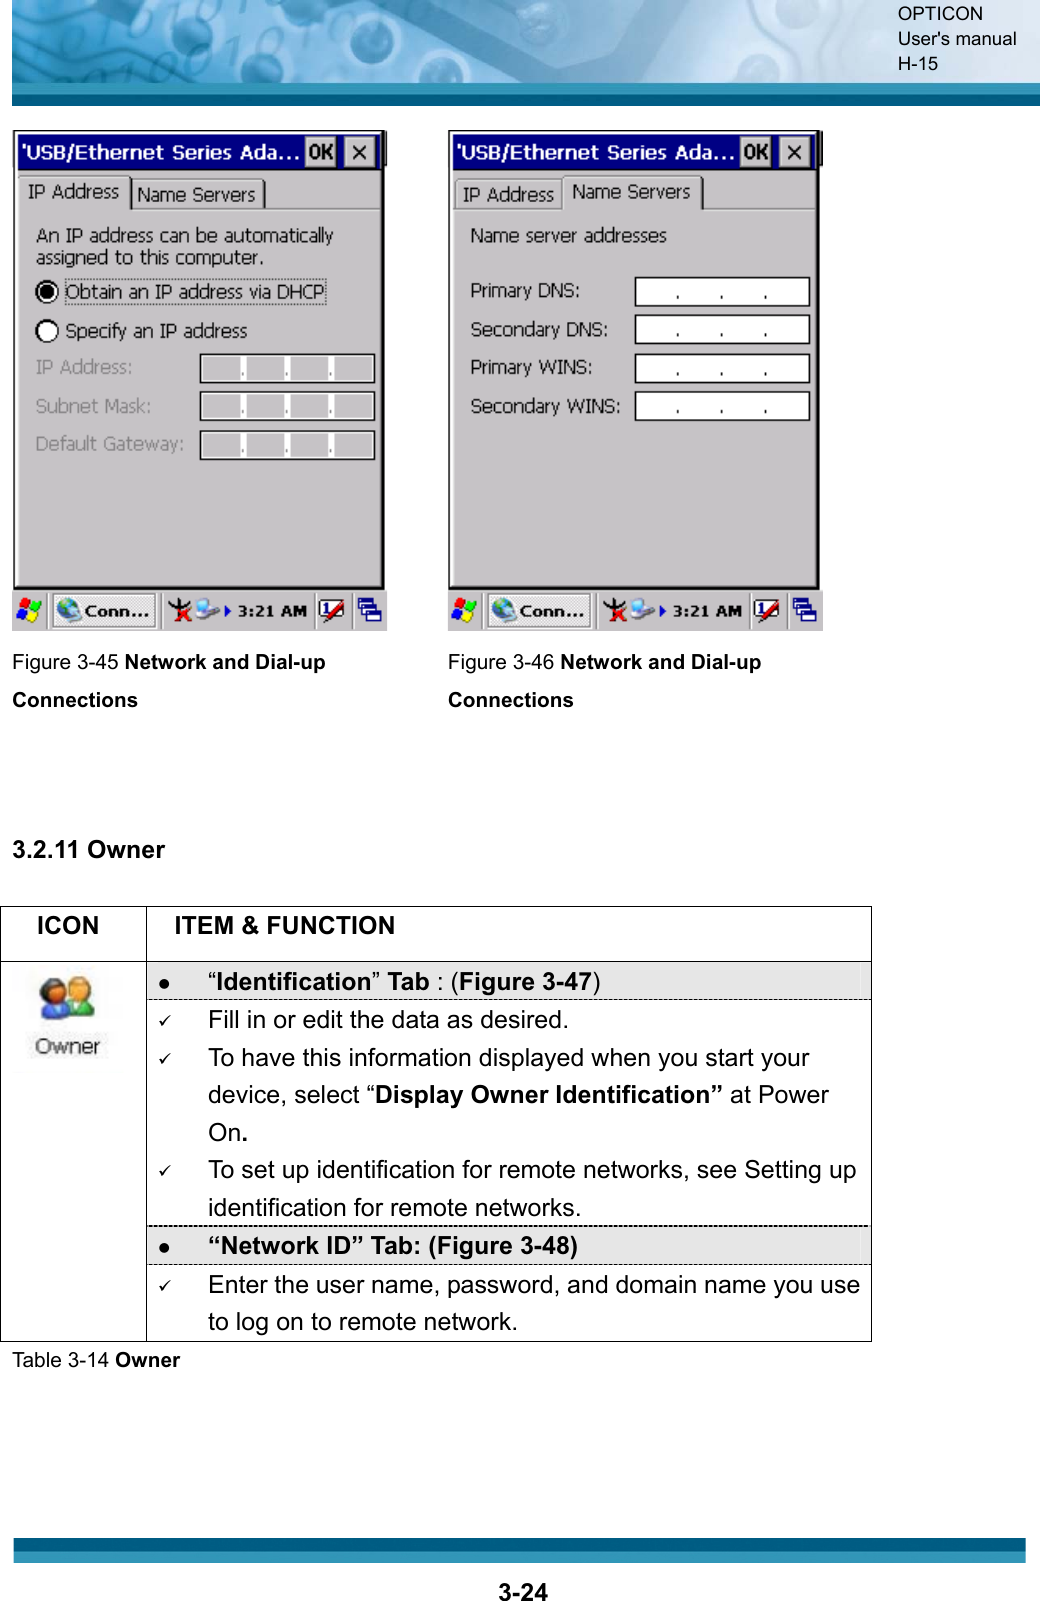 OPTICON User&apos;s manual H-153-24Figure 3-45 Network and Dial-up ConnectionsFigure 3-46 Network and Dial-up Connections3.2.11 Owner ICON ITEM &amp; FUNCTION z“Identification”Tab : (Figure 3-47)9Fill in or edit the data as desired.9To have this information displayed when you start your device, select “Display Owner Identification” at Power On.9To set up identification for remote networks, see Setting up identification for remote networks.z“Network ID” Tab: (Figure 3-48)9Enter the user name, password, and domain name you use to log on to remote network.Table 3-14 Owner